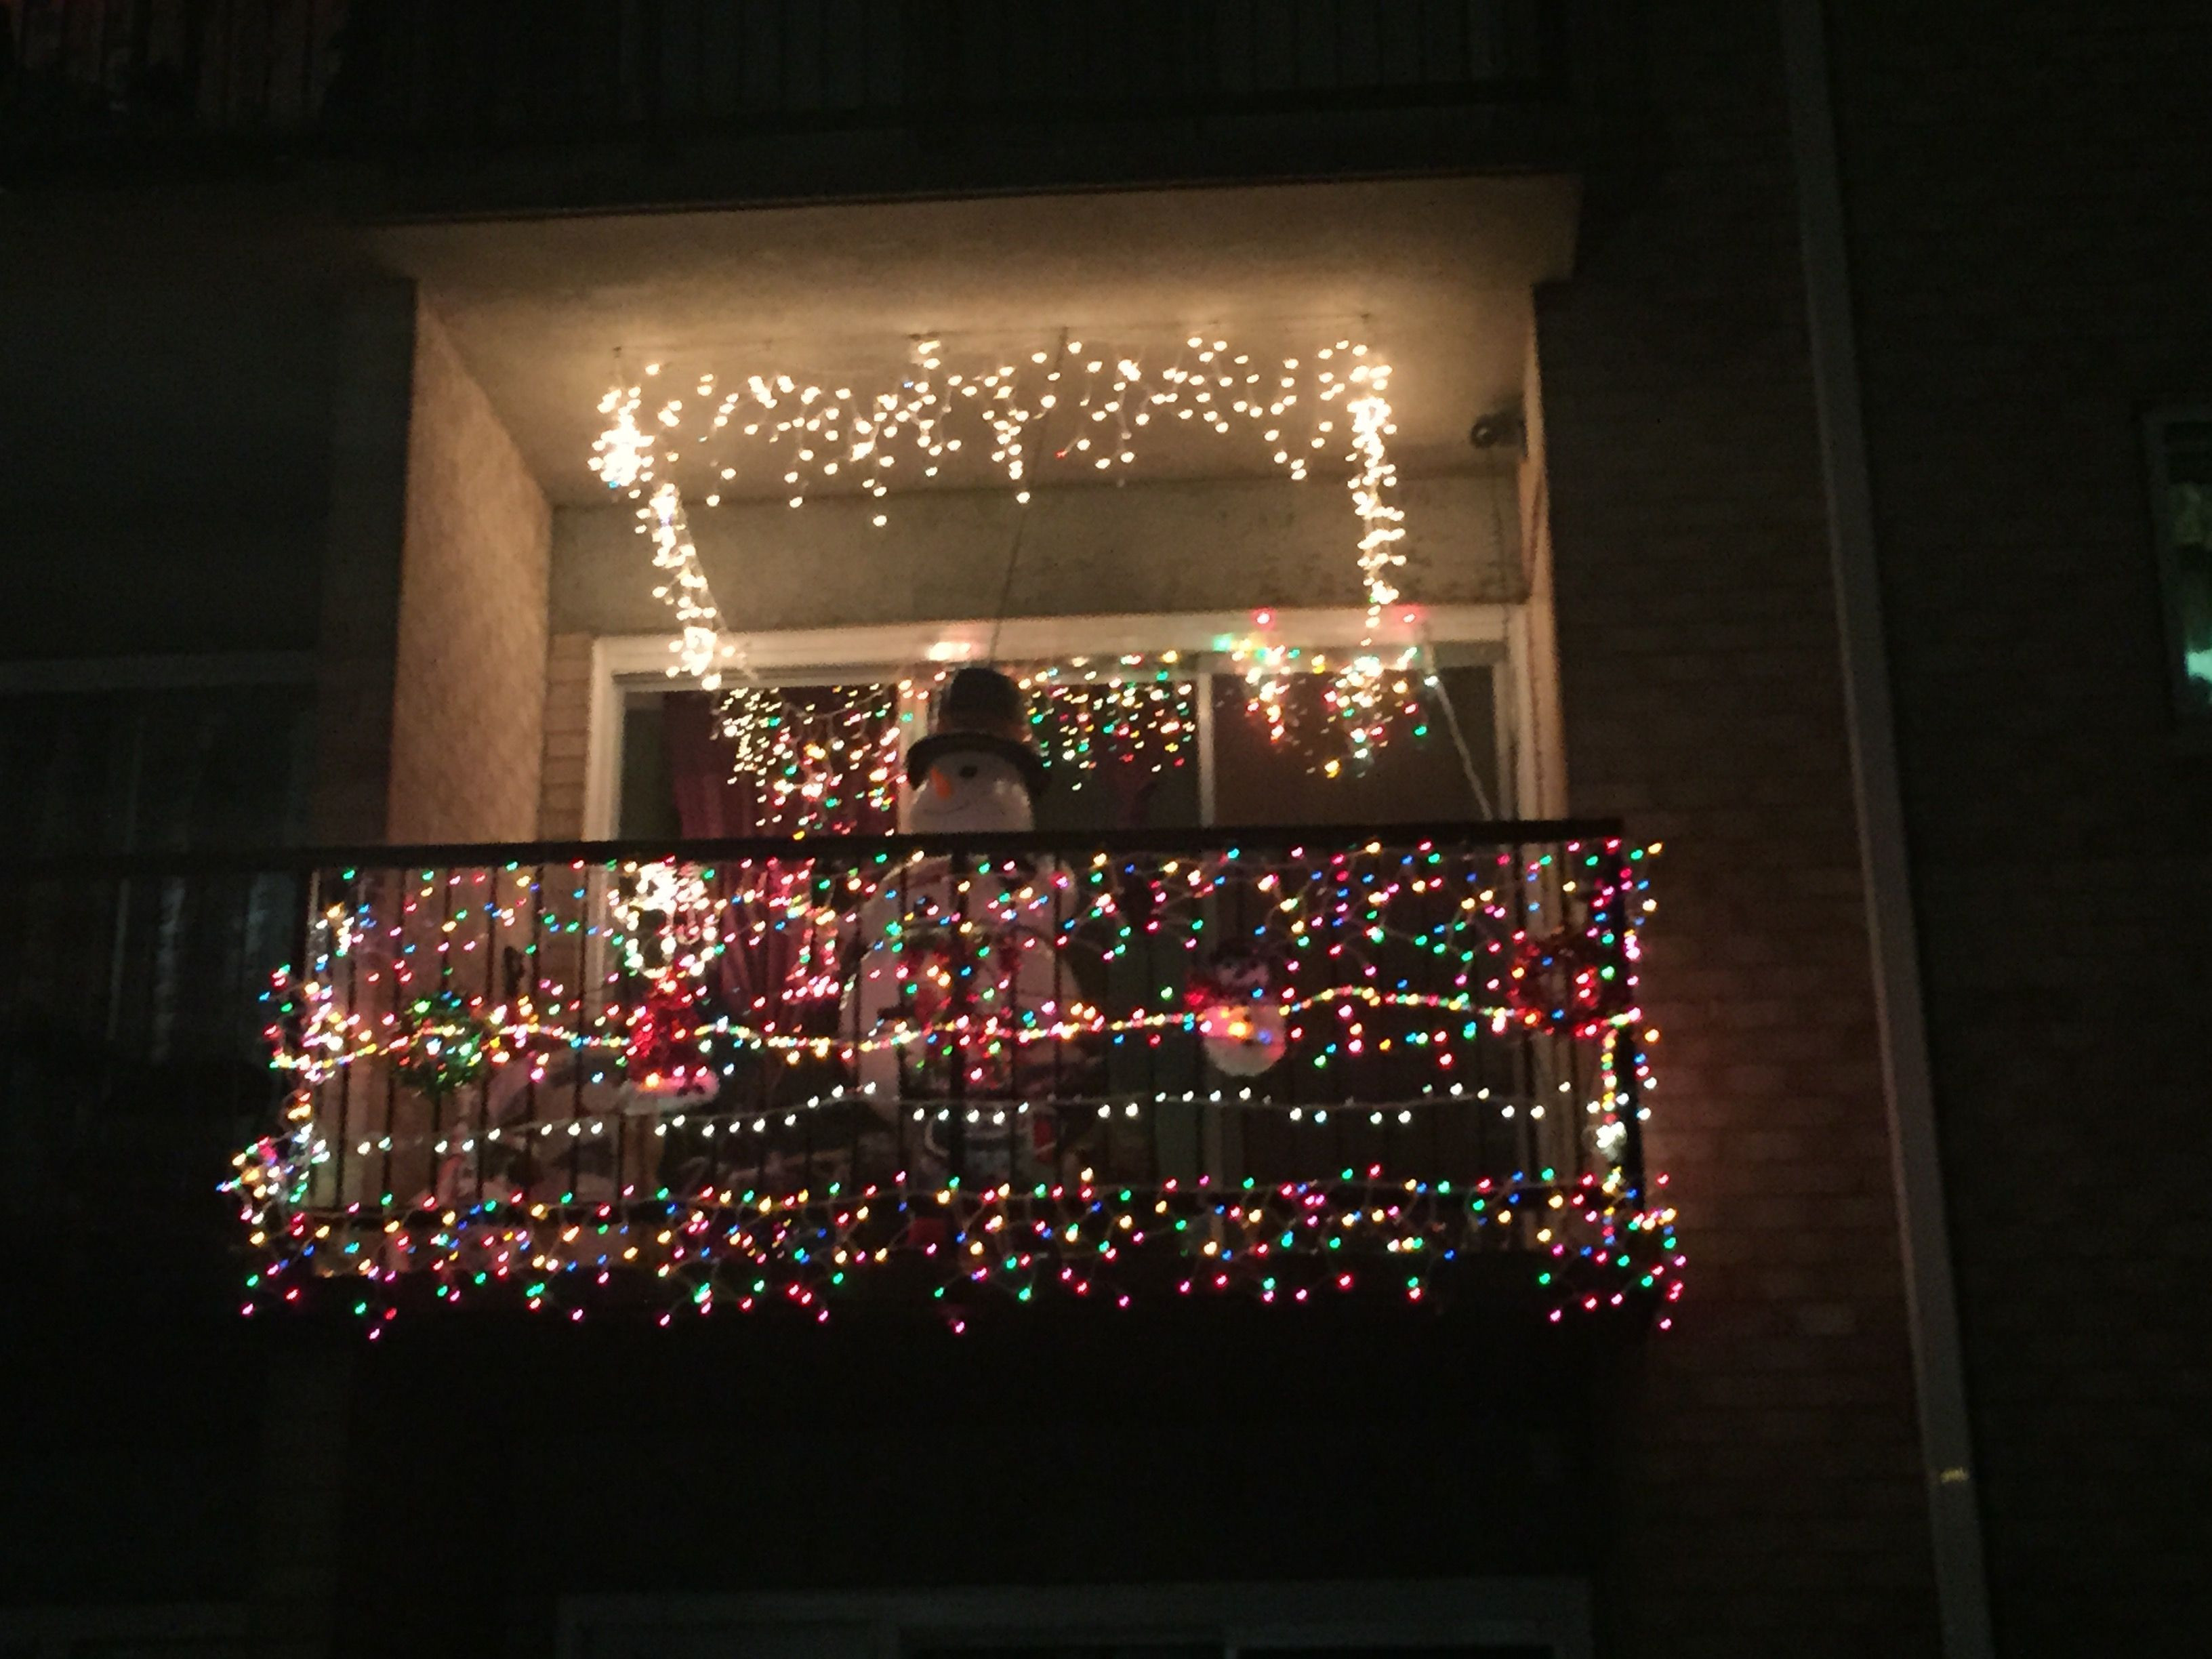 Apartment Balcony Christmas Decorating Ideas
 Our residents went all out for the first ever Beacon Hill